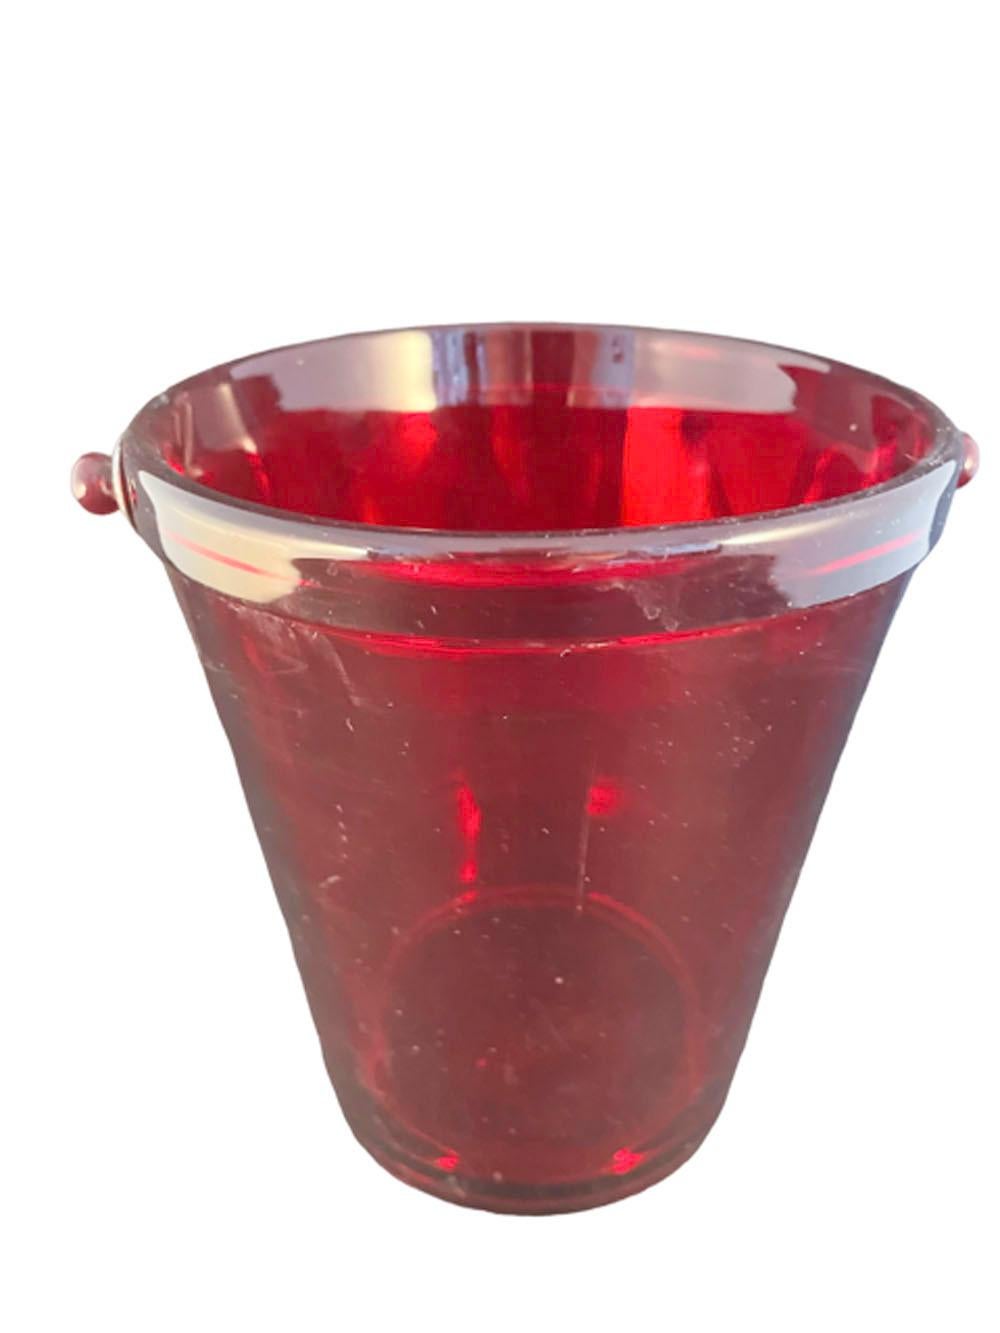 Art Deco, Fostoria Glass Co., ruby red pail form Ice bucket with chromed metal bail handle,

NOTE: The rim is not silvered, it is all red. That is reflection in the images.